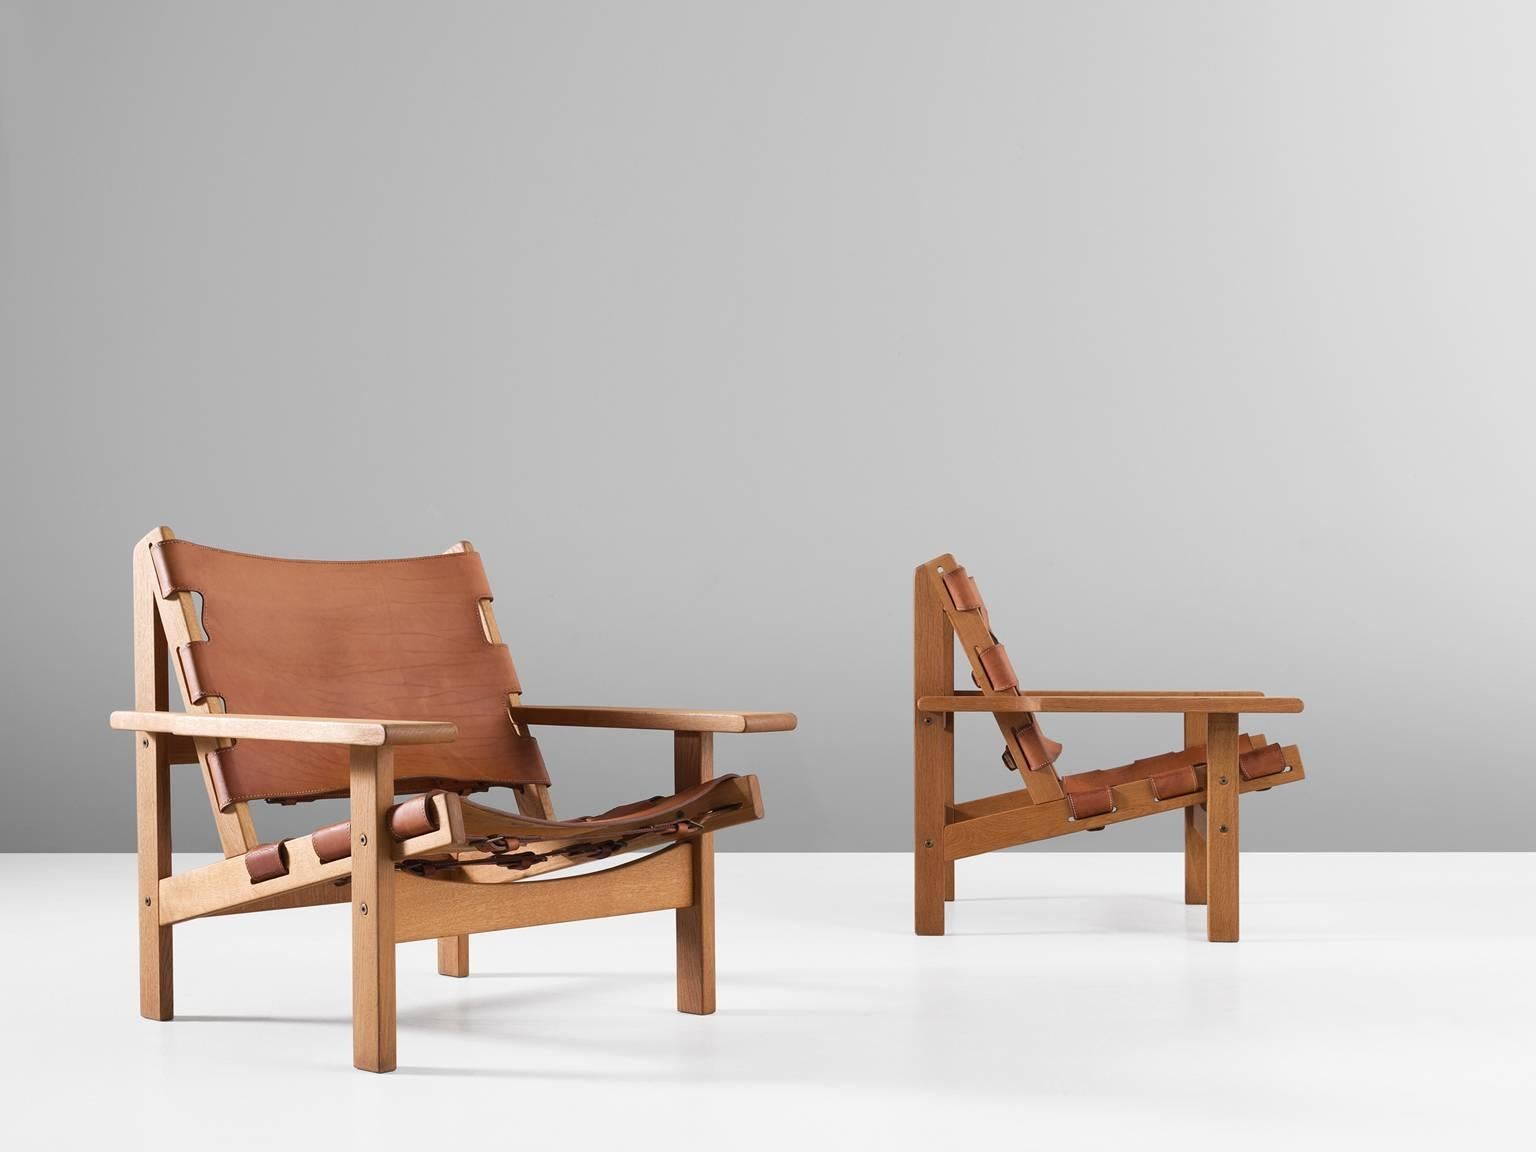 Pair of armchairs, in oak and leather, by Erling Jessen, Denmark, 1960s. 

Stunning pair of 'Jagt Stolen' by Erling Jessen, who was inspired by Børge Mogensens Spanish chair. The frame consist of solid oak and makes a sturdy appearance. The